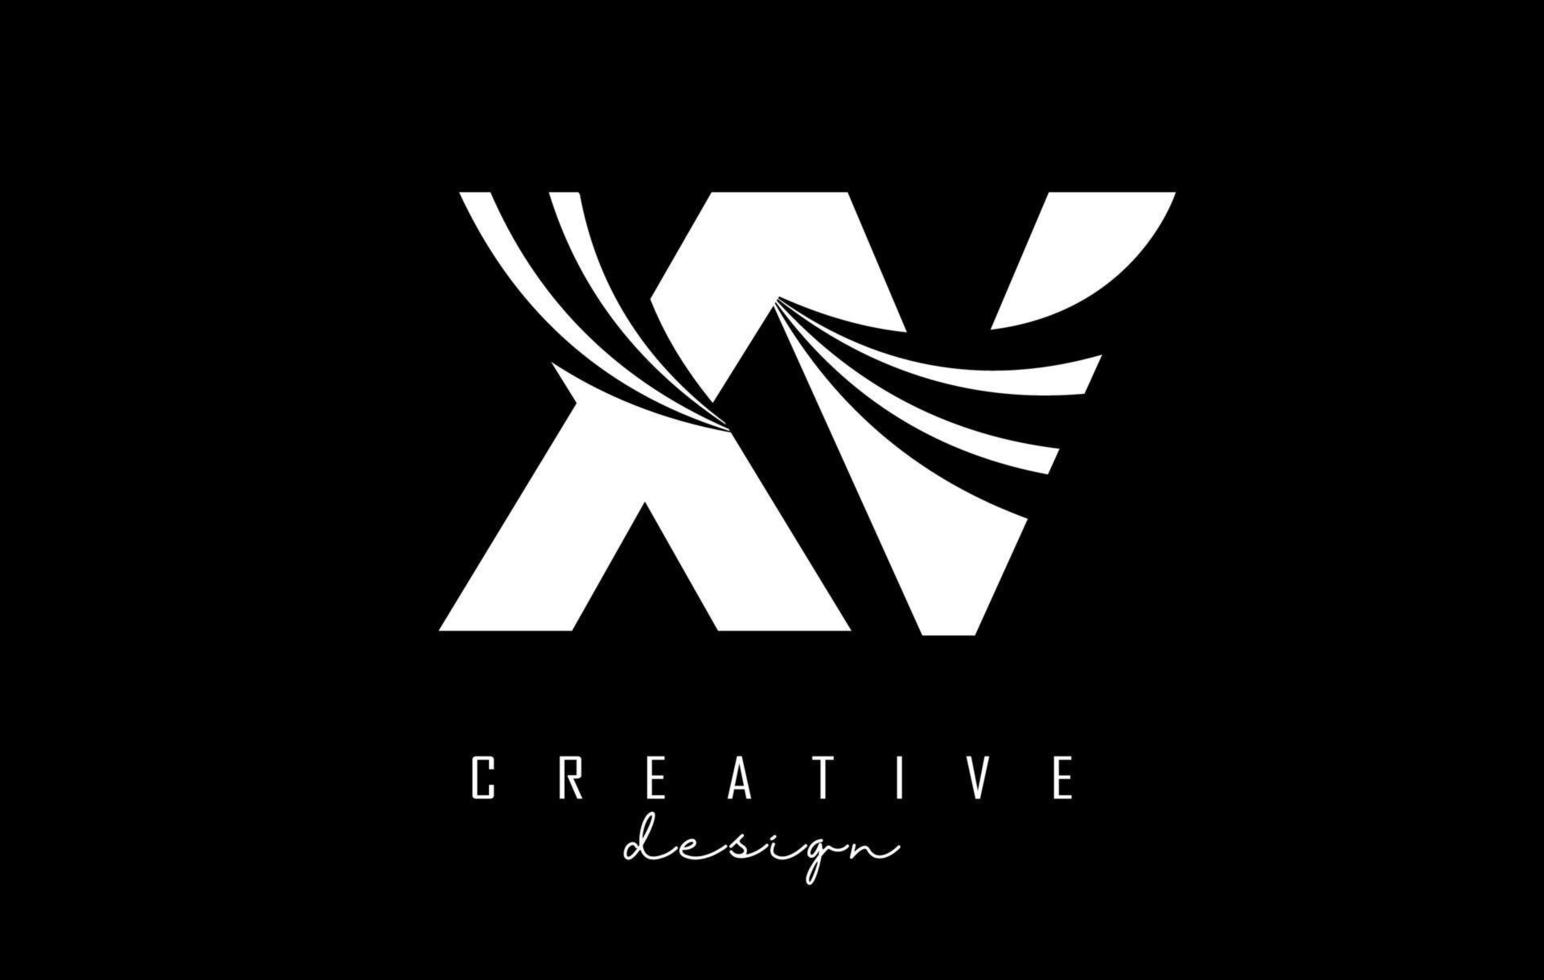 Creative white letters XV x v logo with leading lines and road concept design. Letters with geometric design. vector